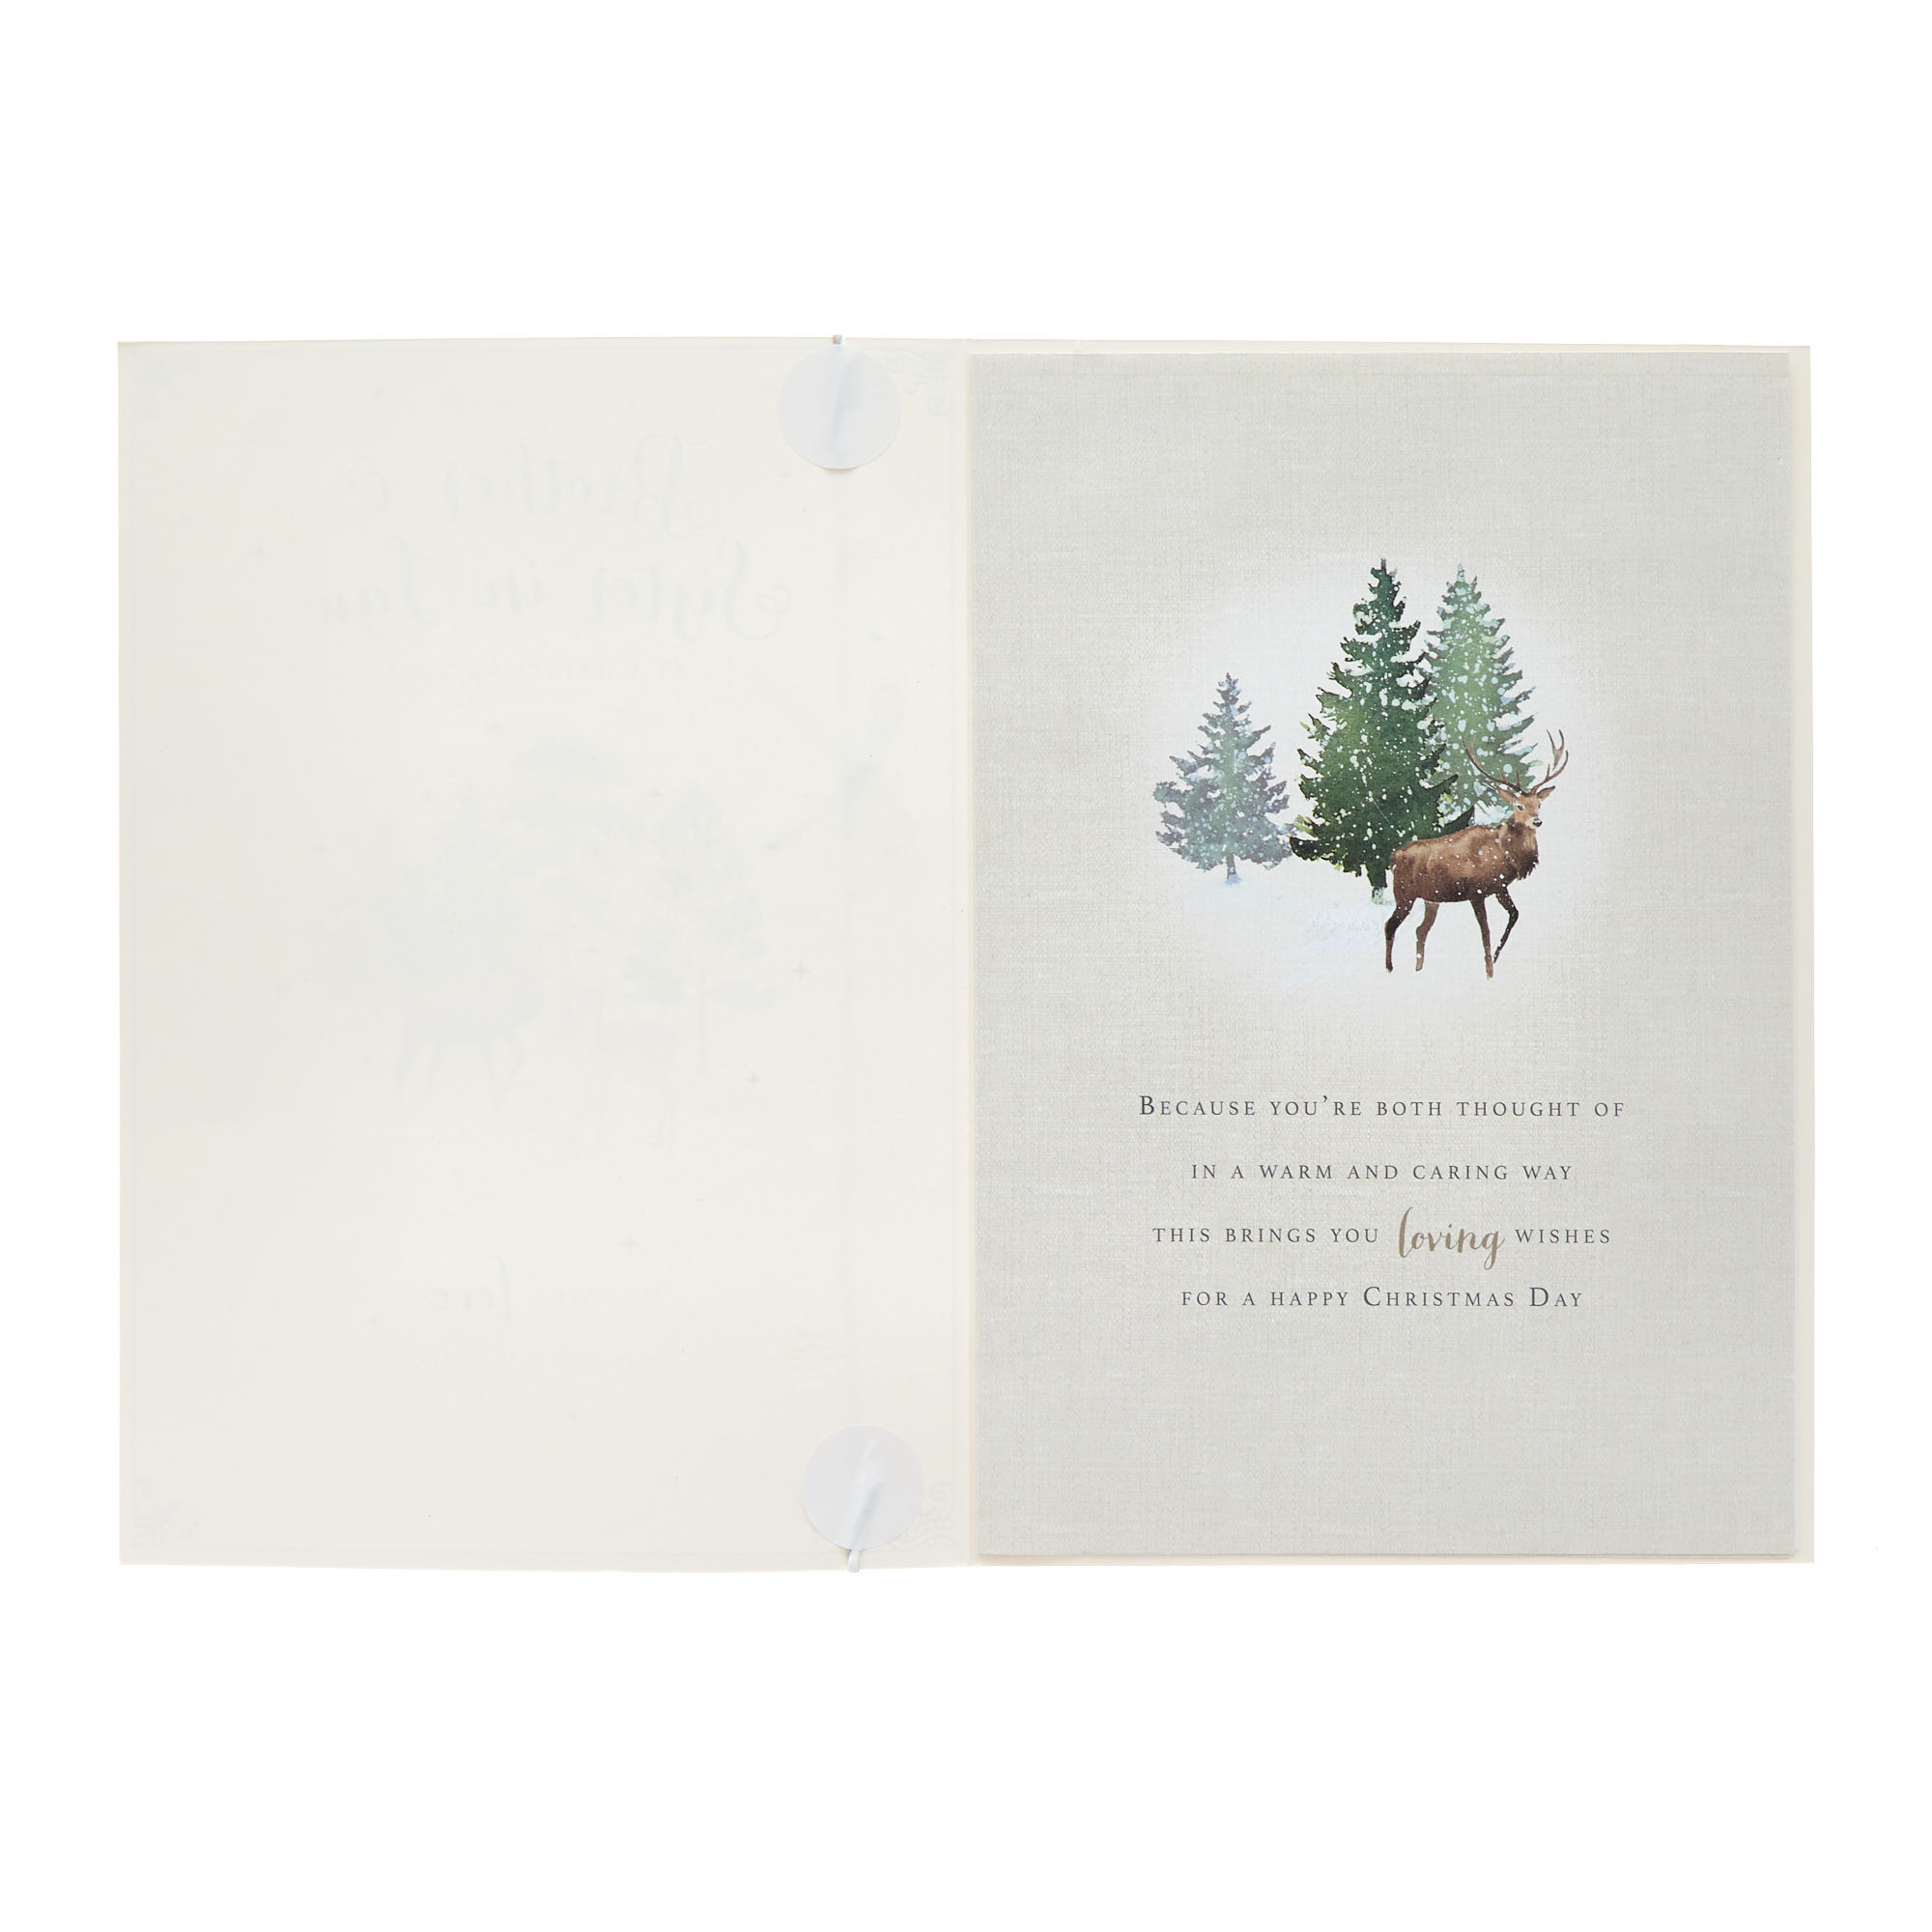 Brother & Sister In Law Deers & Trees Christmas Card